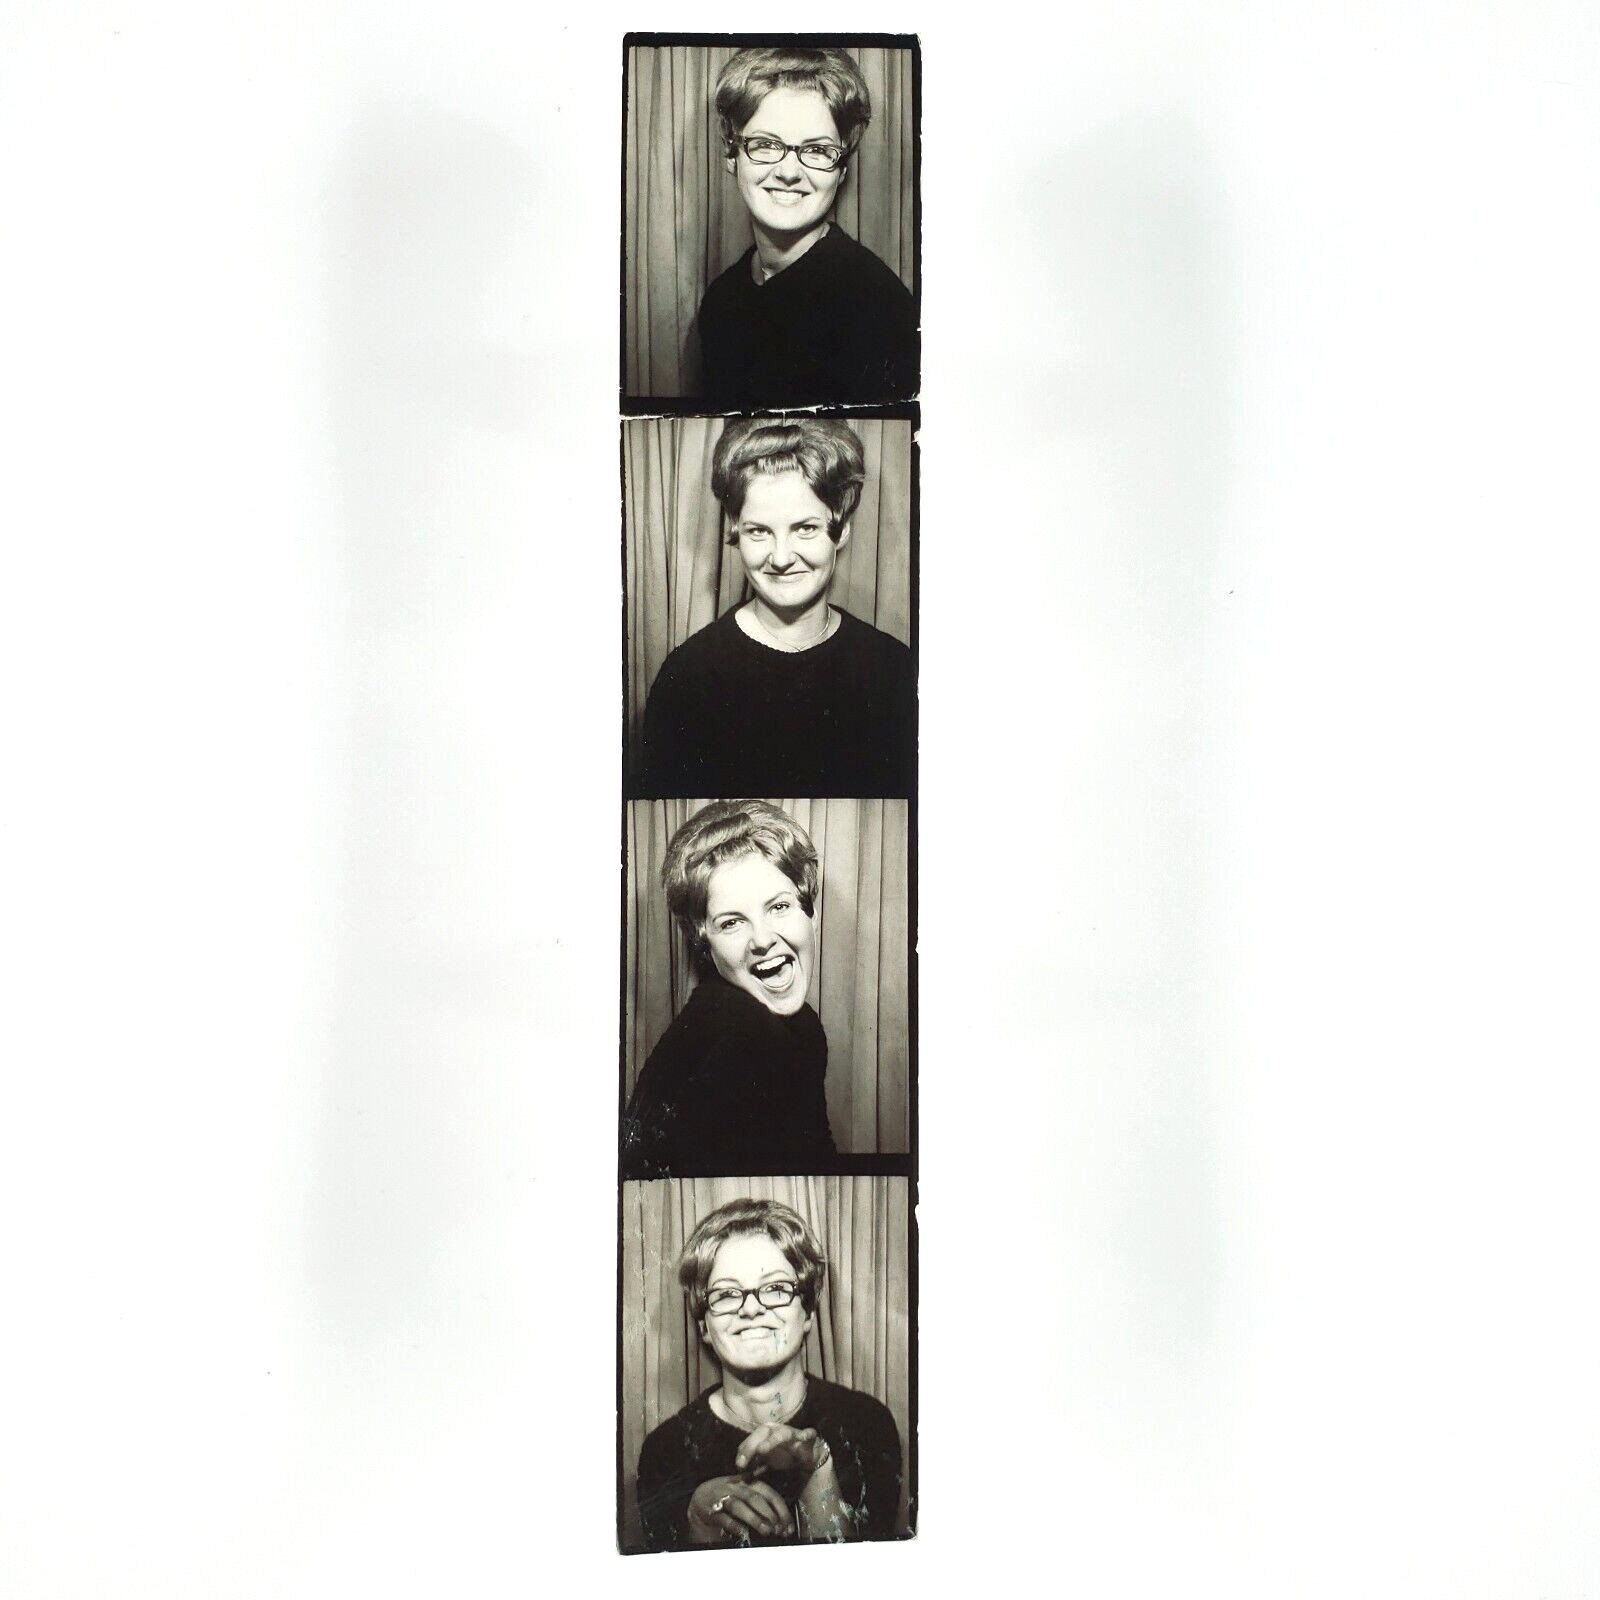 Silly Portland Oregon Girl Photobooth Snapshot 1960s Smiling Young Woman A516